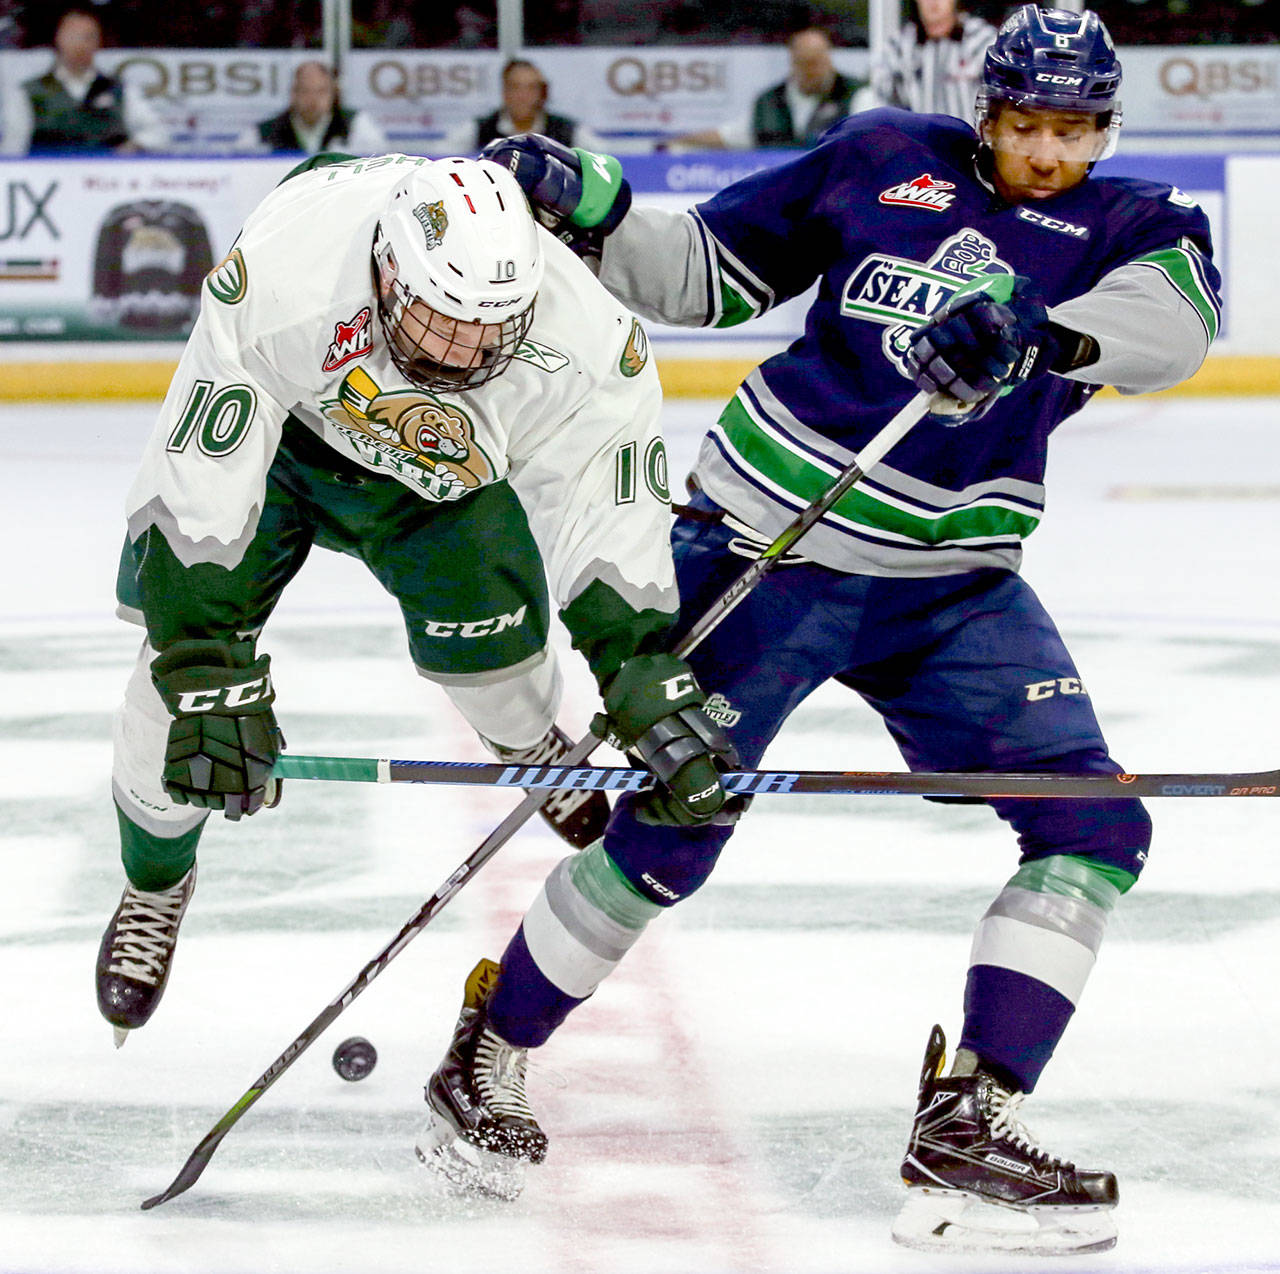 The Silvertips’ Conrad Mitchell is tripped by the Thunderbirds’ Aaron Hyman in the first period of a preseason game Sept. 2, 2017, at Xfinity Arena in Everett. (Kevin Clark / The Herald)